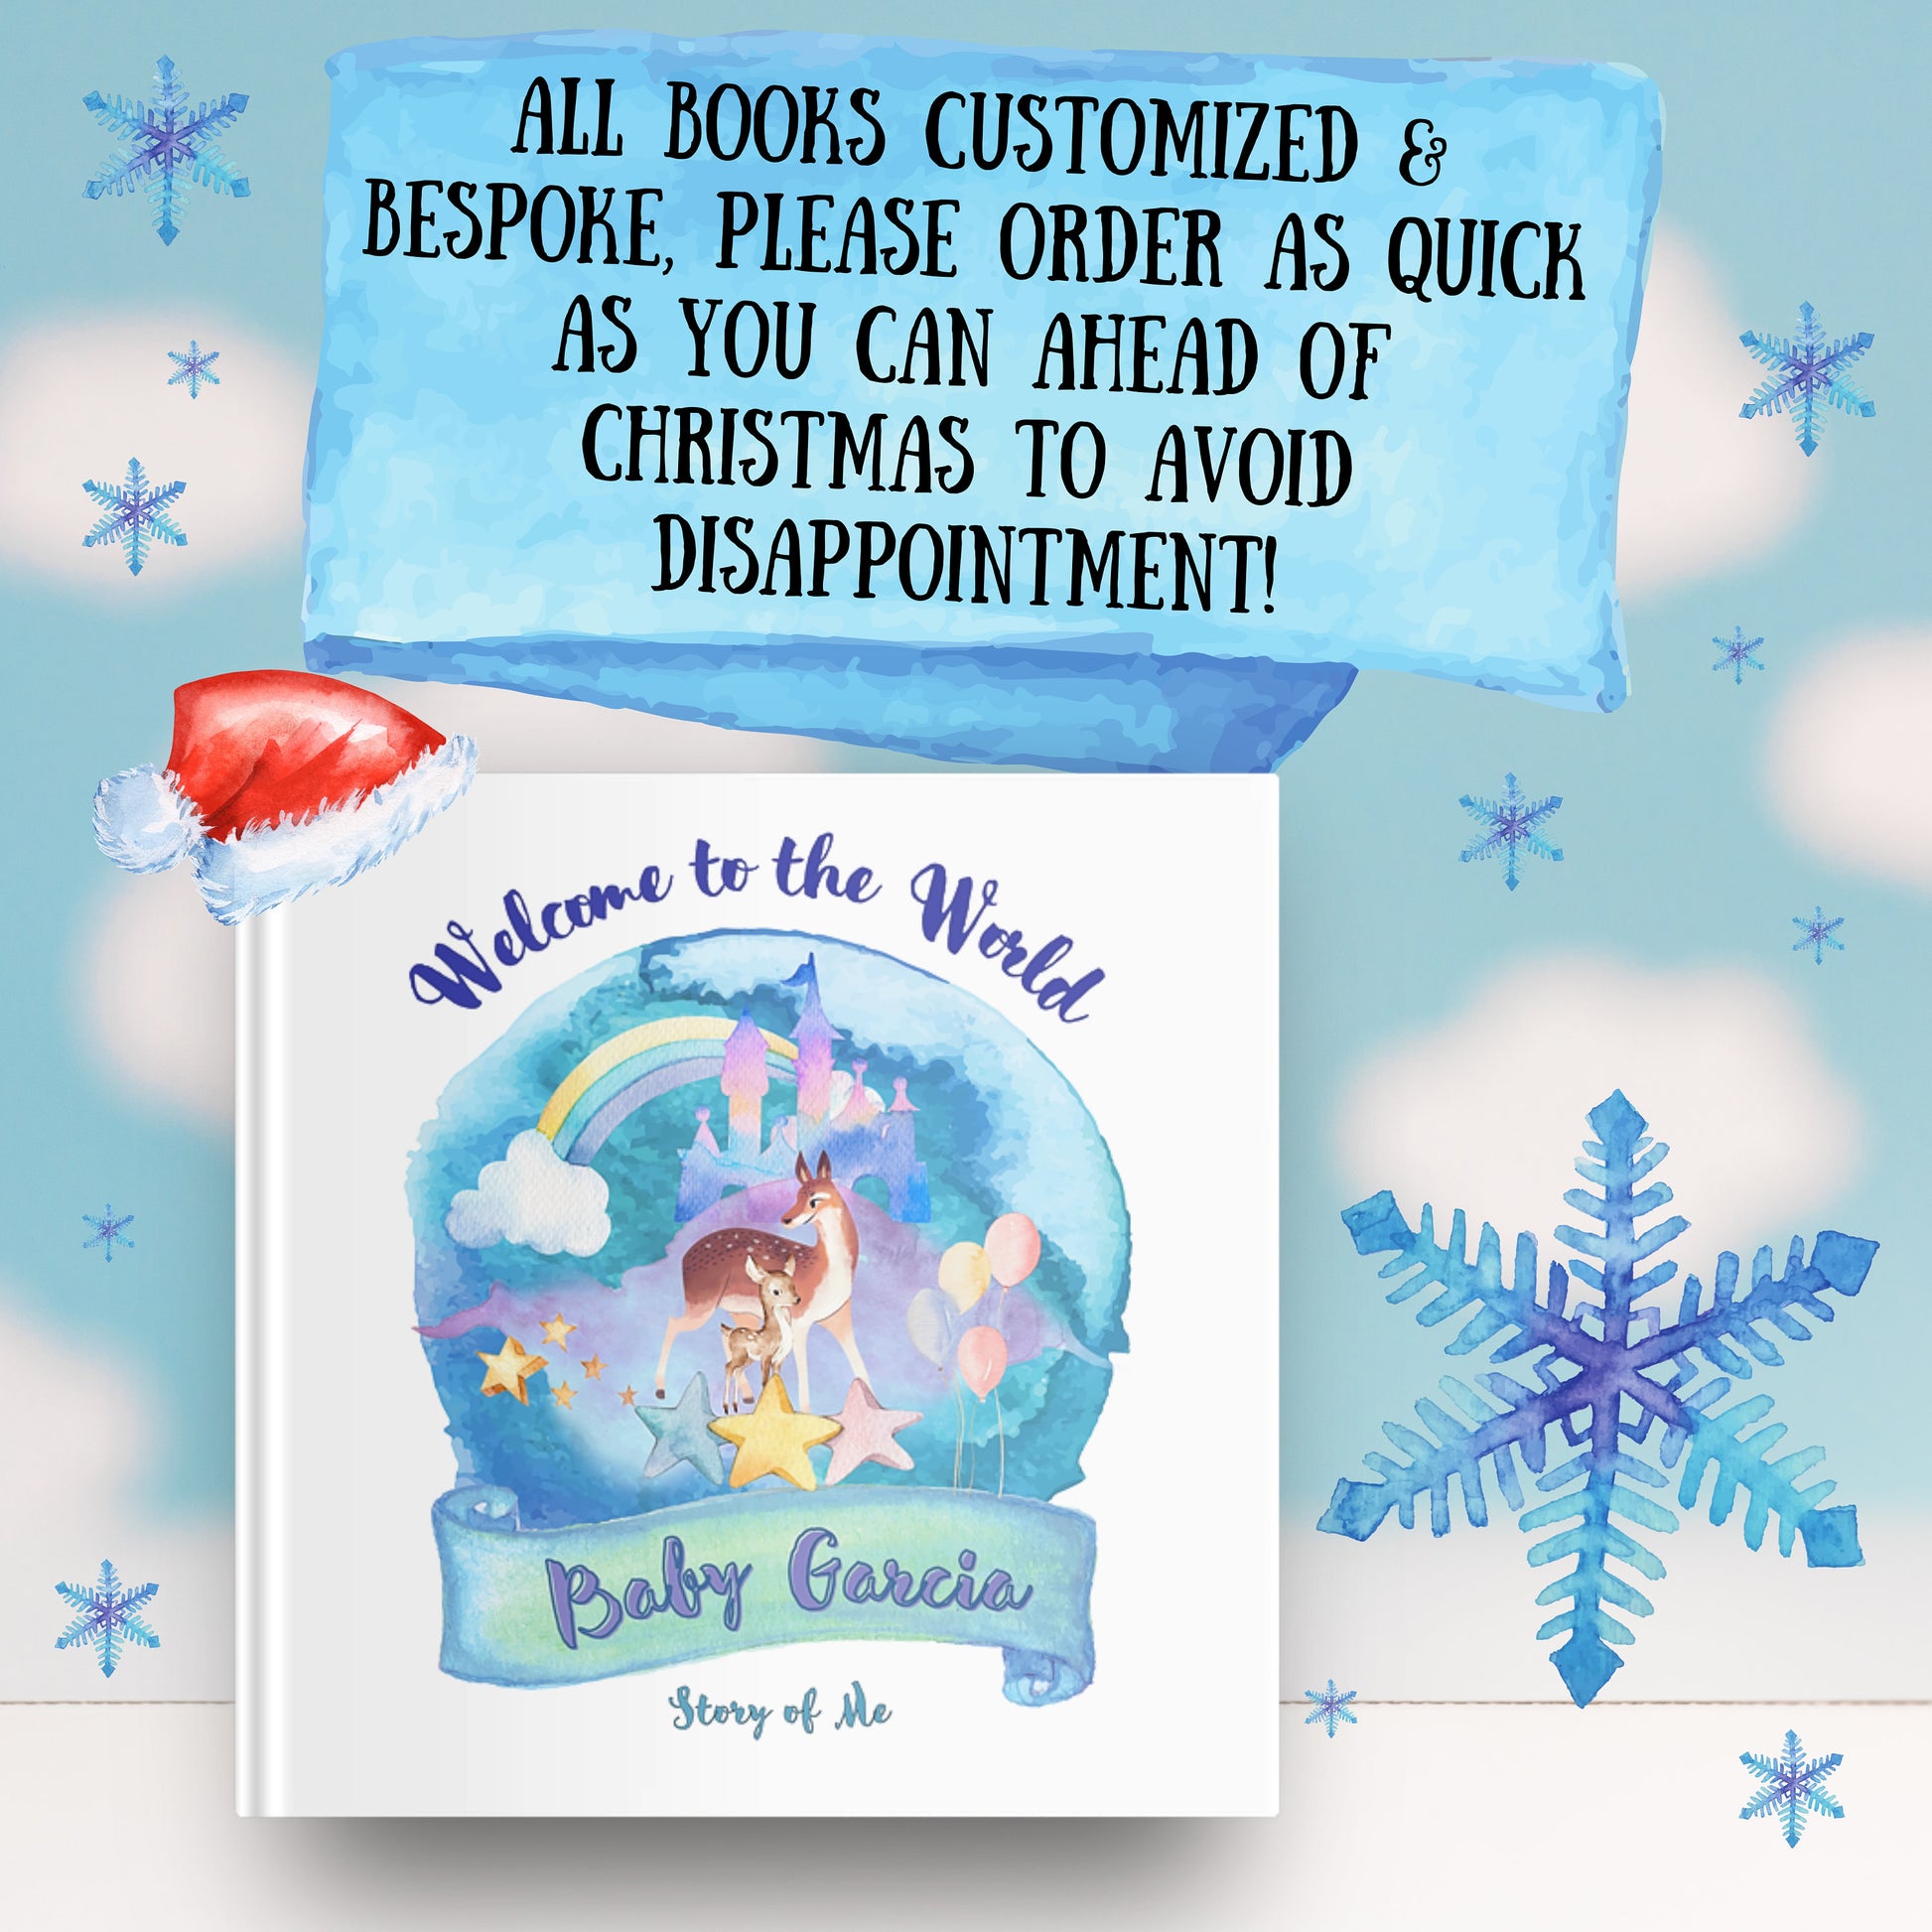 Personalized New Baby Book - Welcome to the World, featuring the child or family name - customized with Child&#39;s Name & more